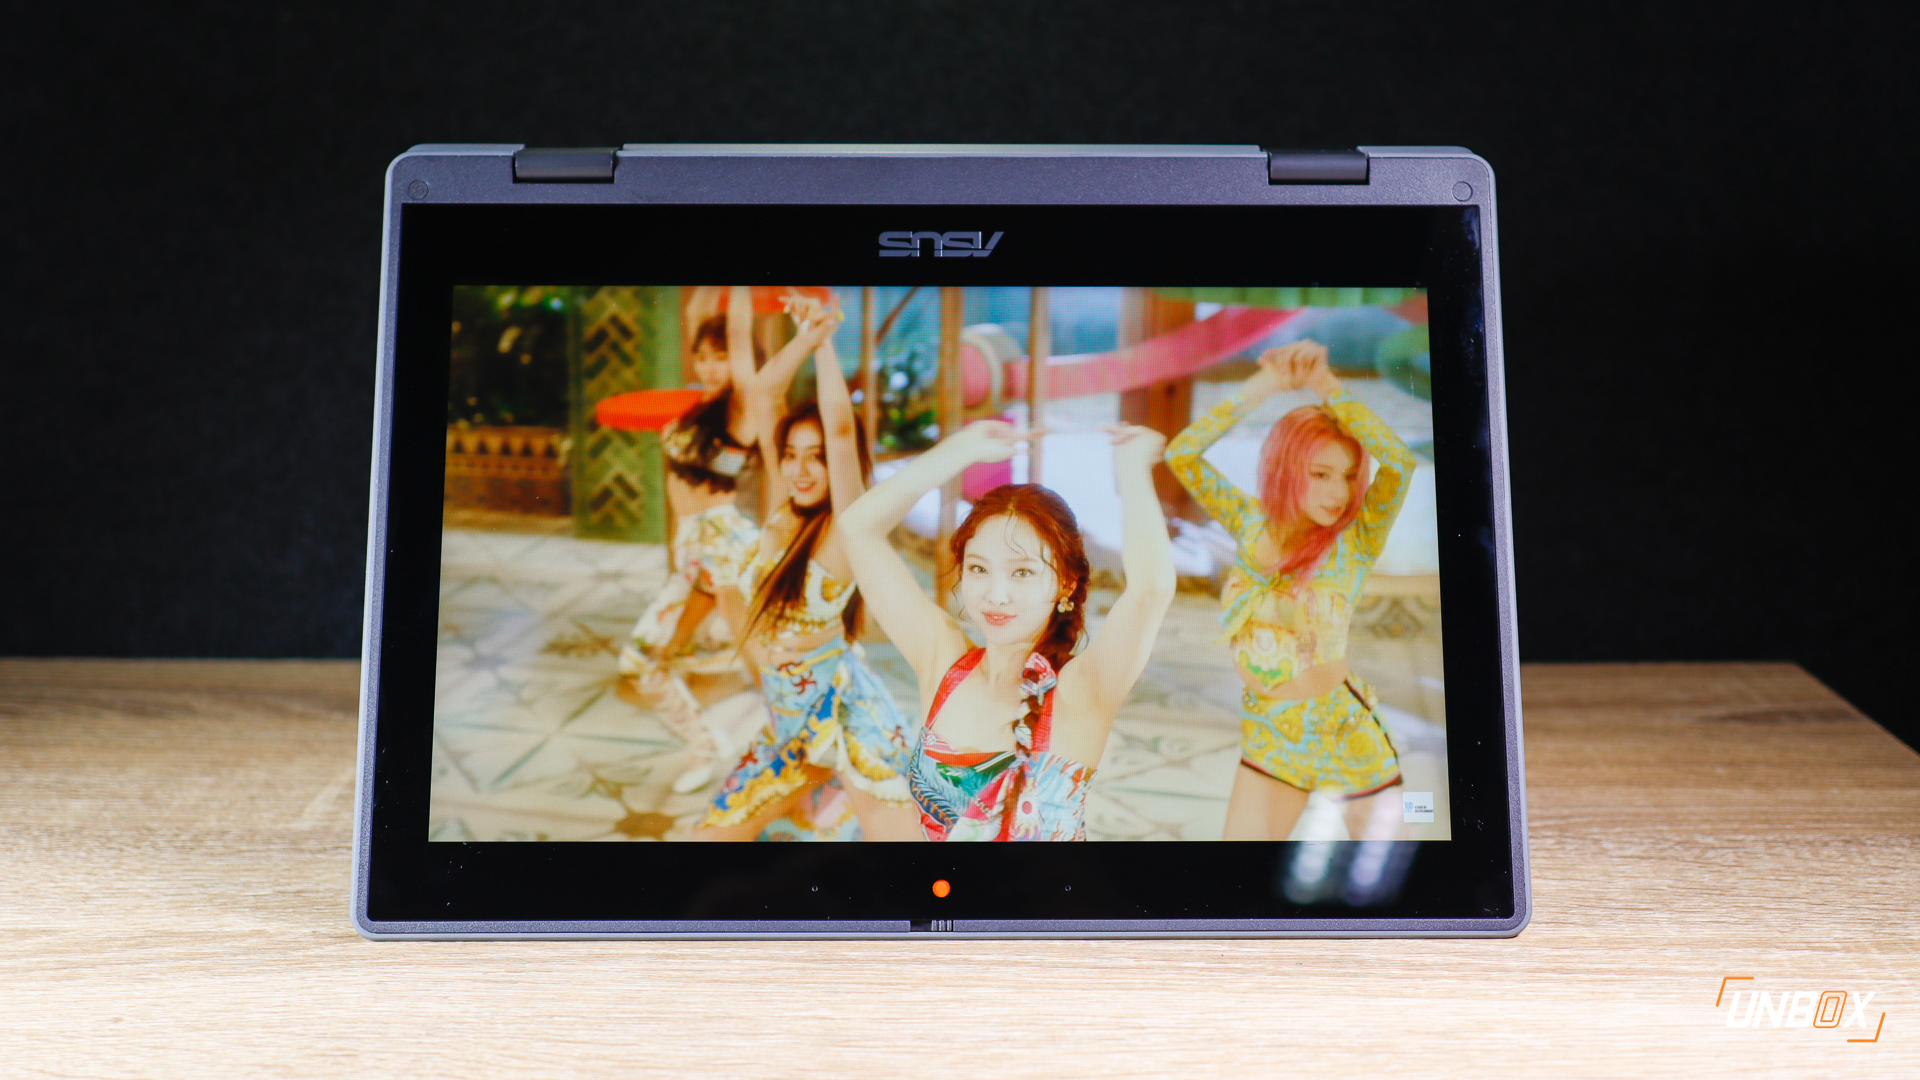 ASUS BR1100F Review Philippines: Modern-Day EEE PC